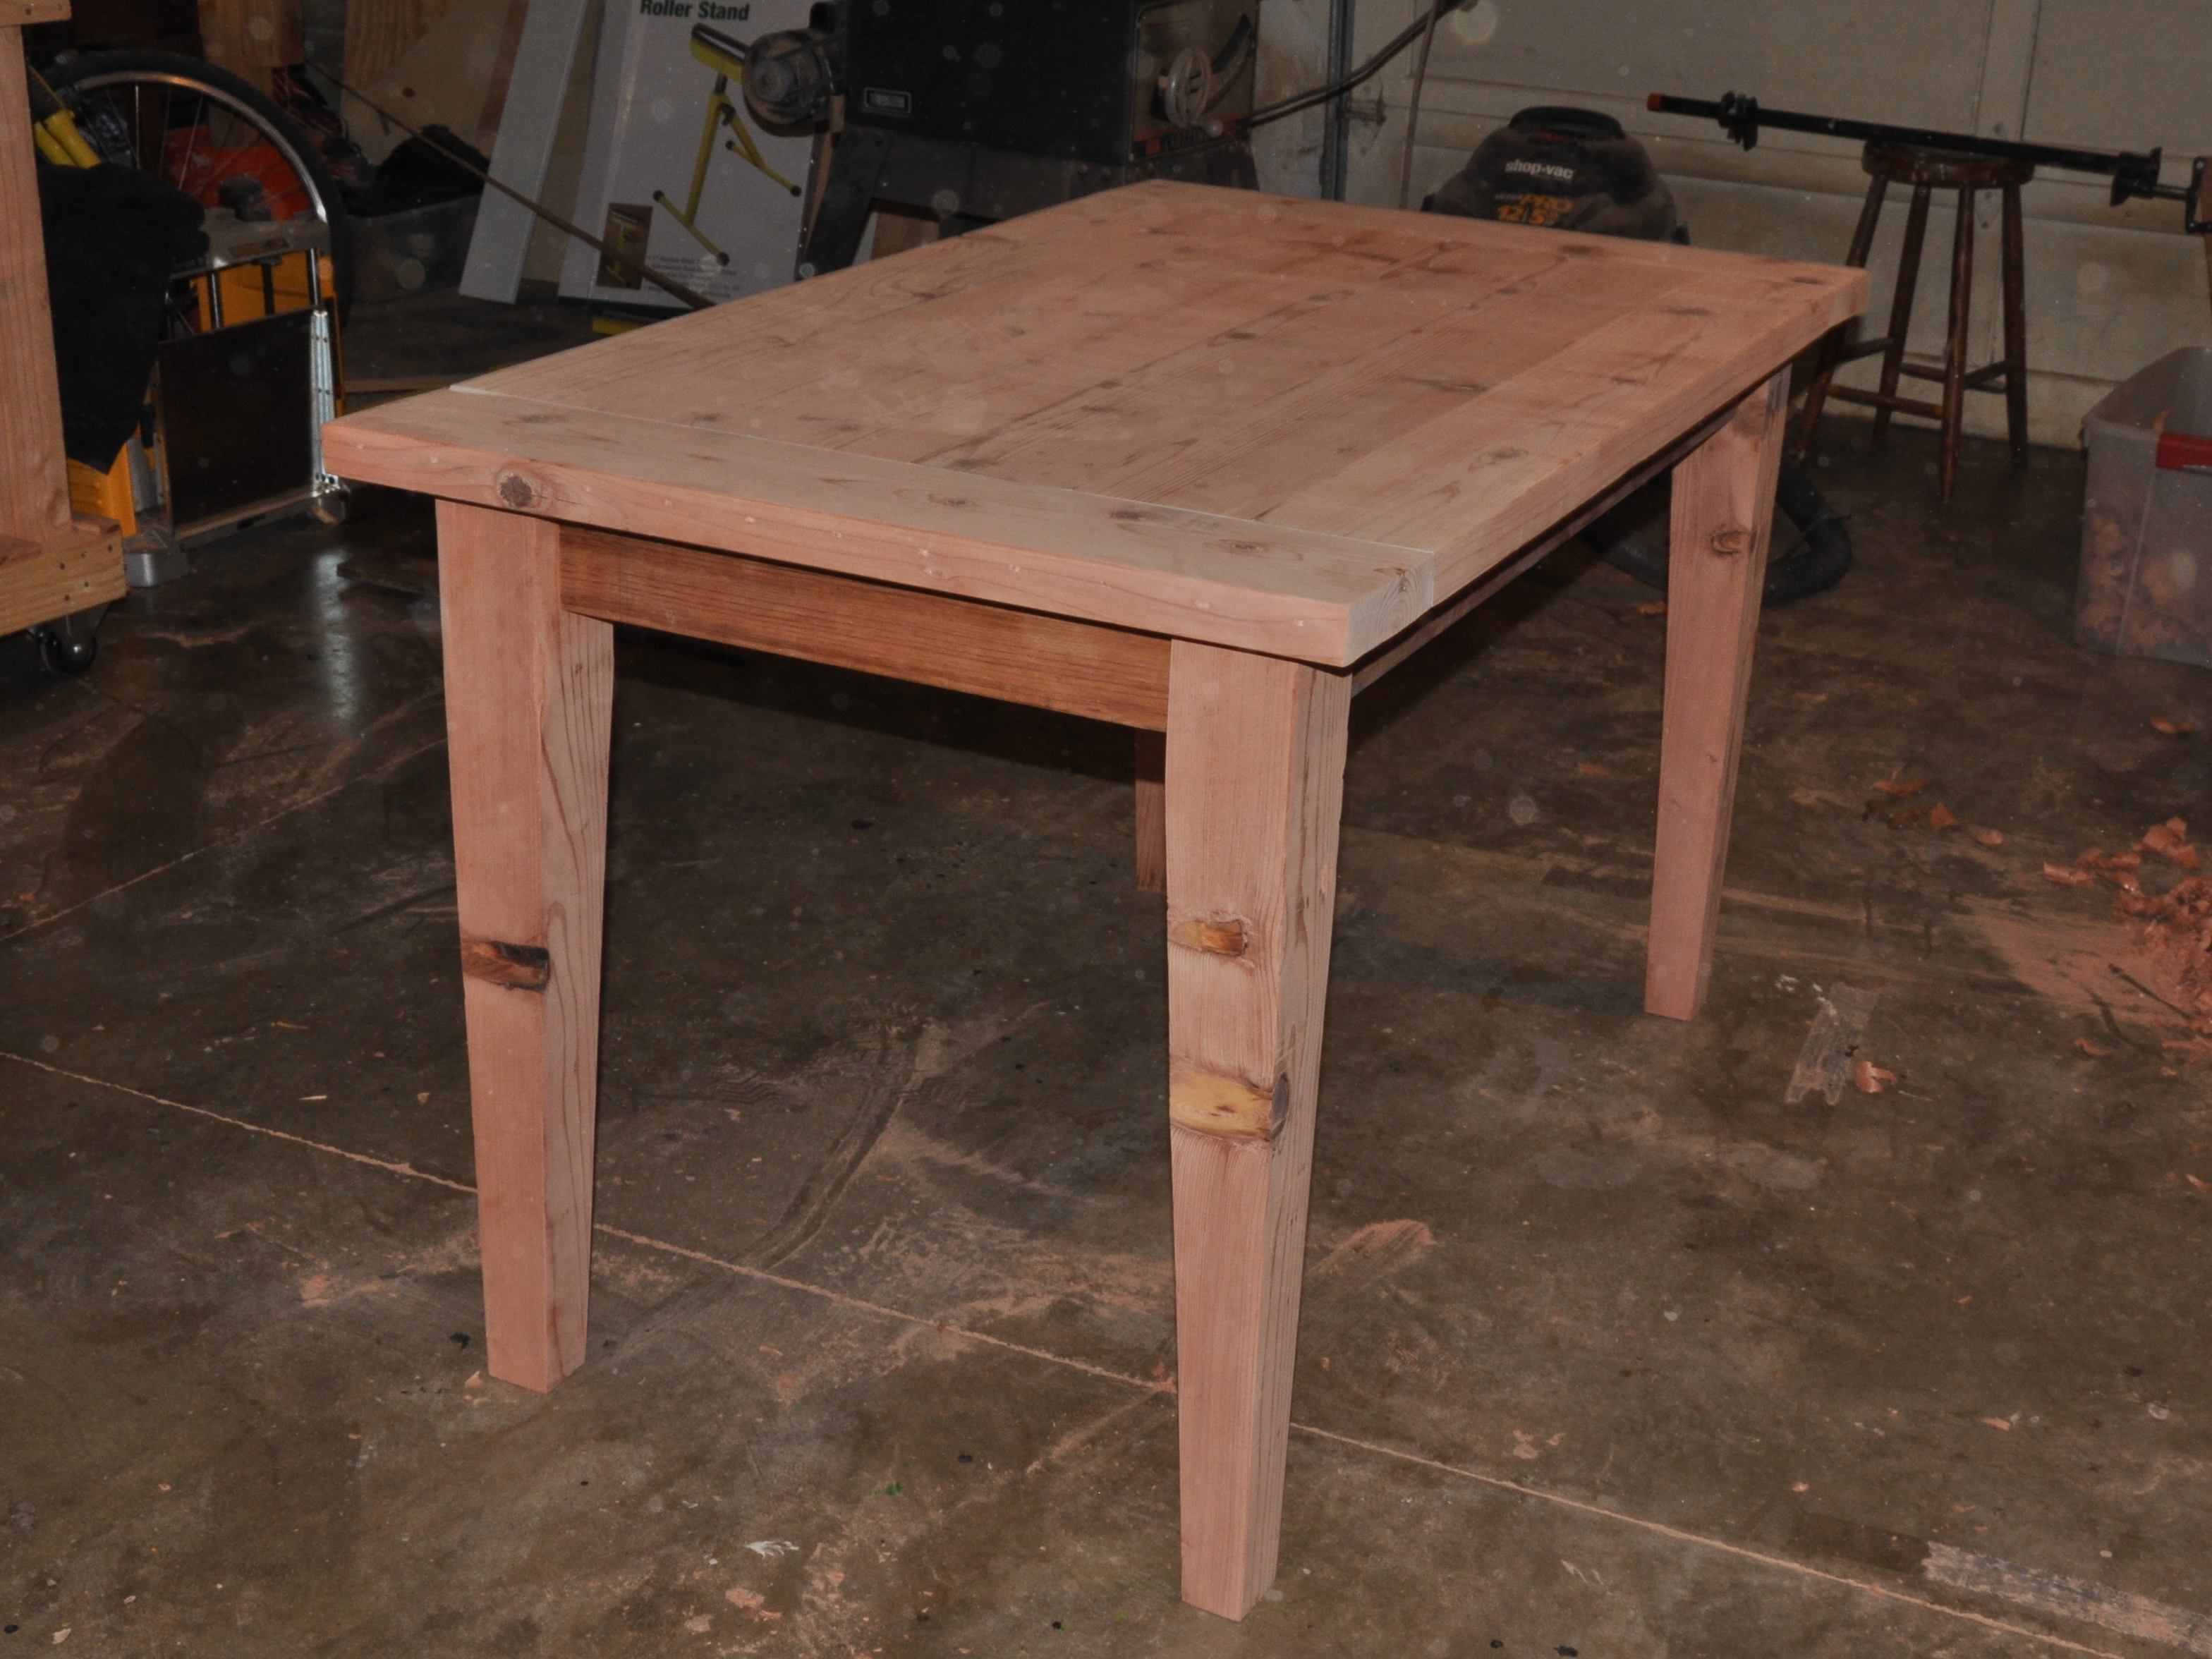 make a wooden table that is easily disassembled make: